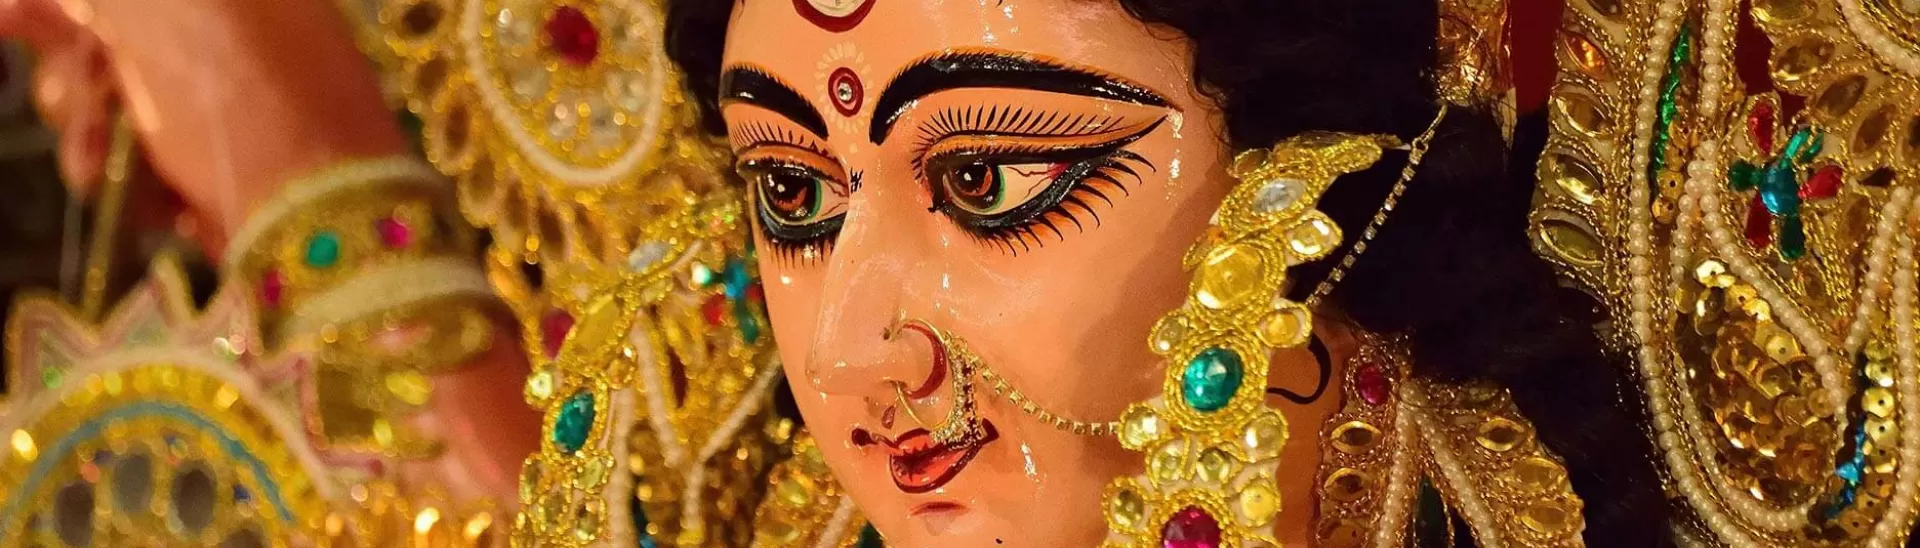 How to Get your Home Durga Puja Ready?